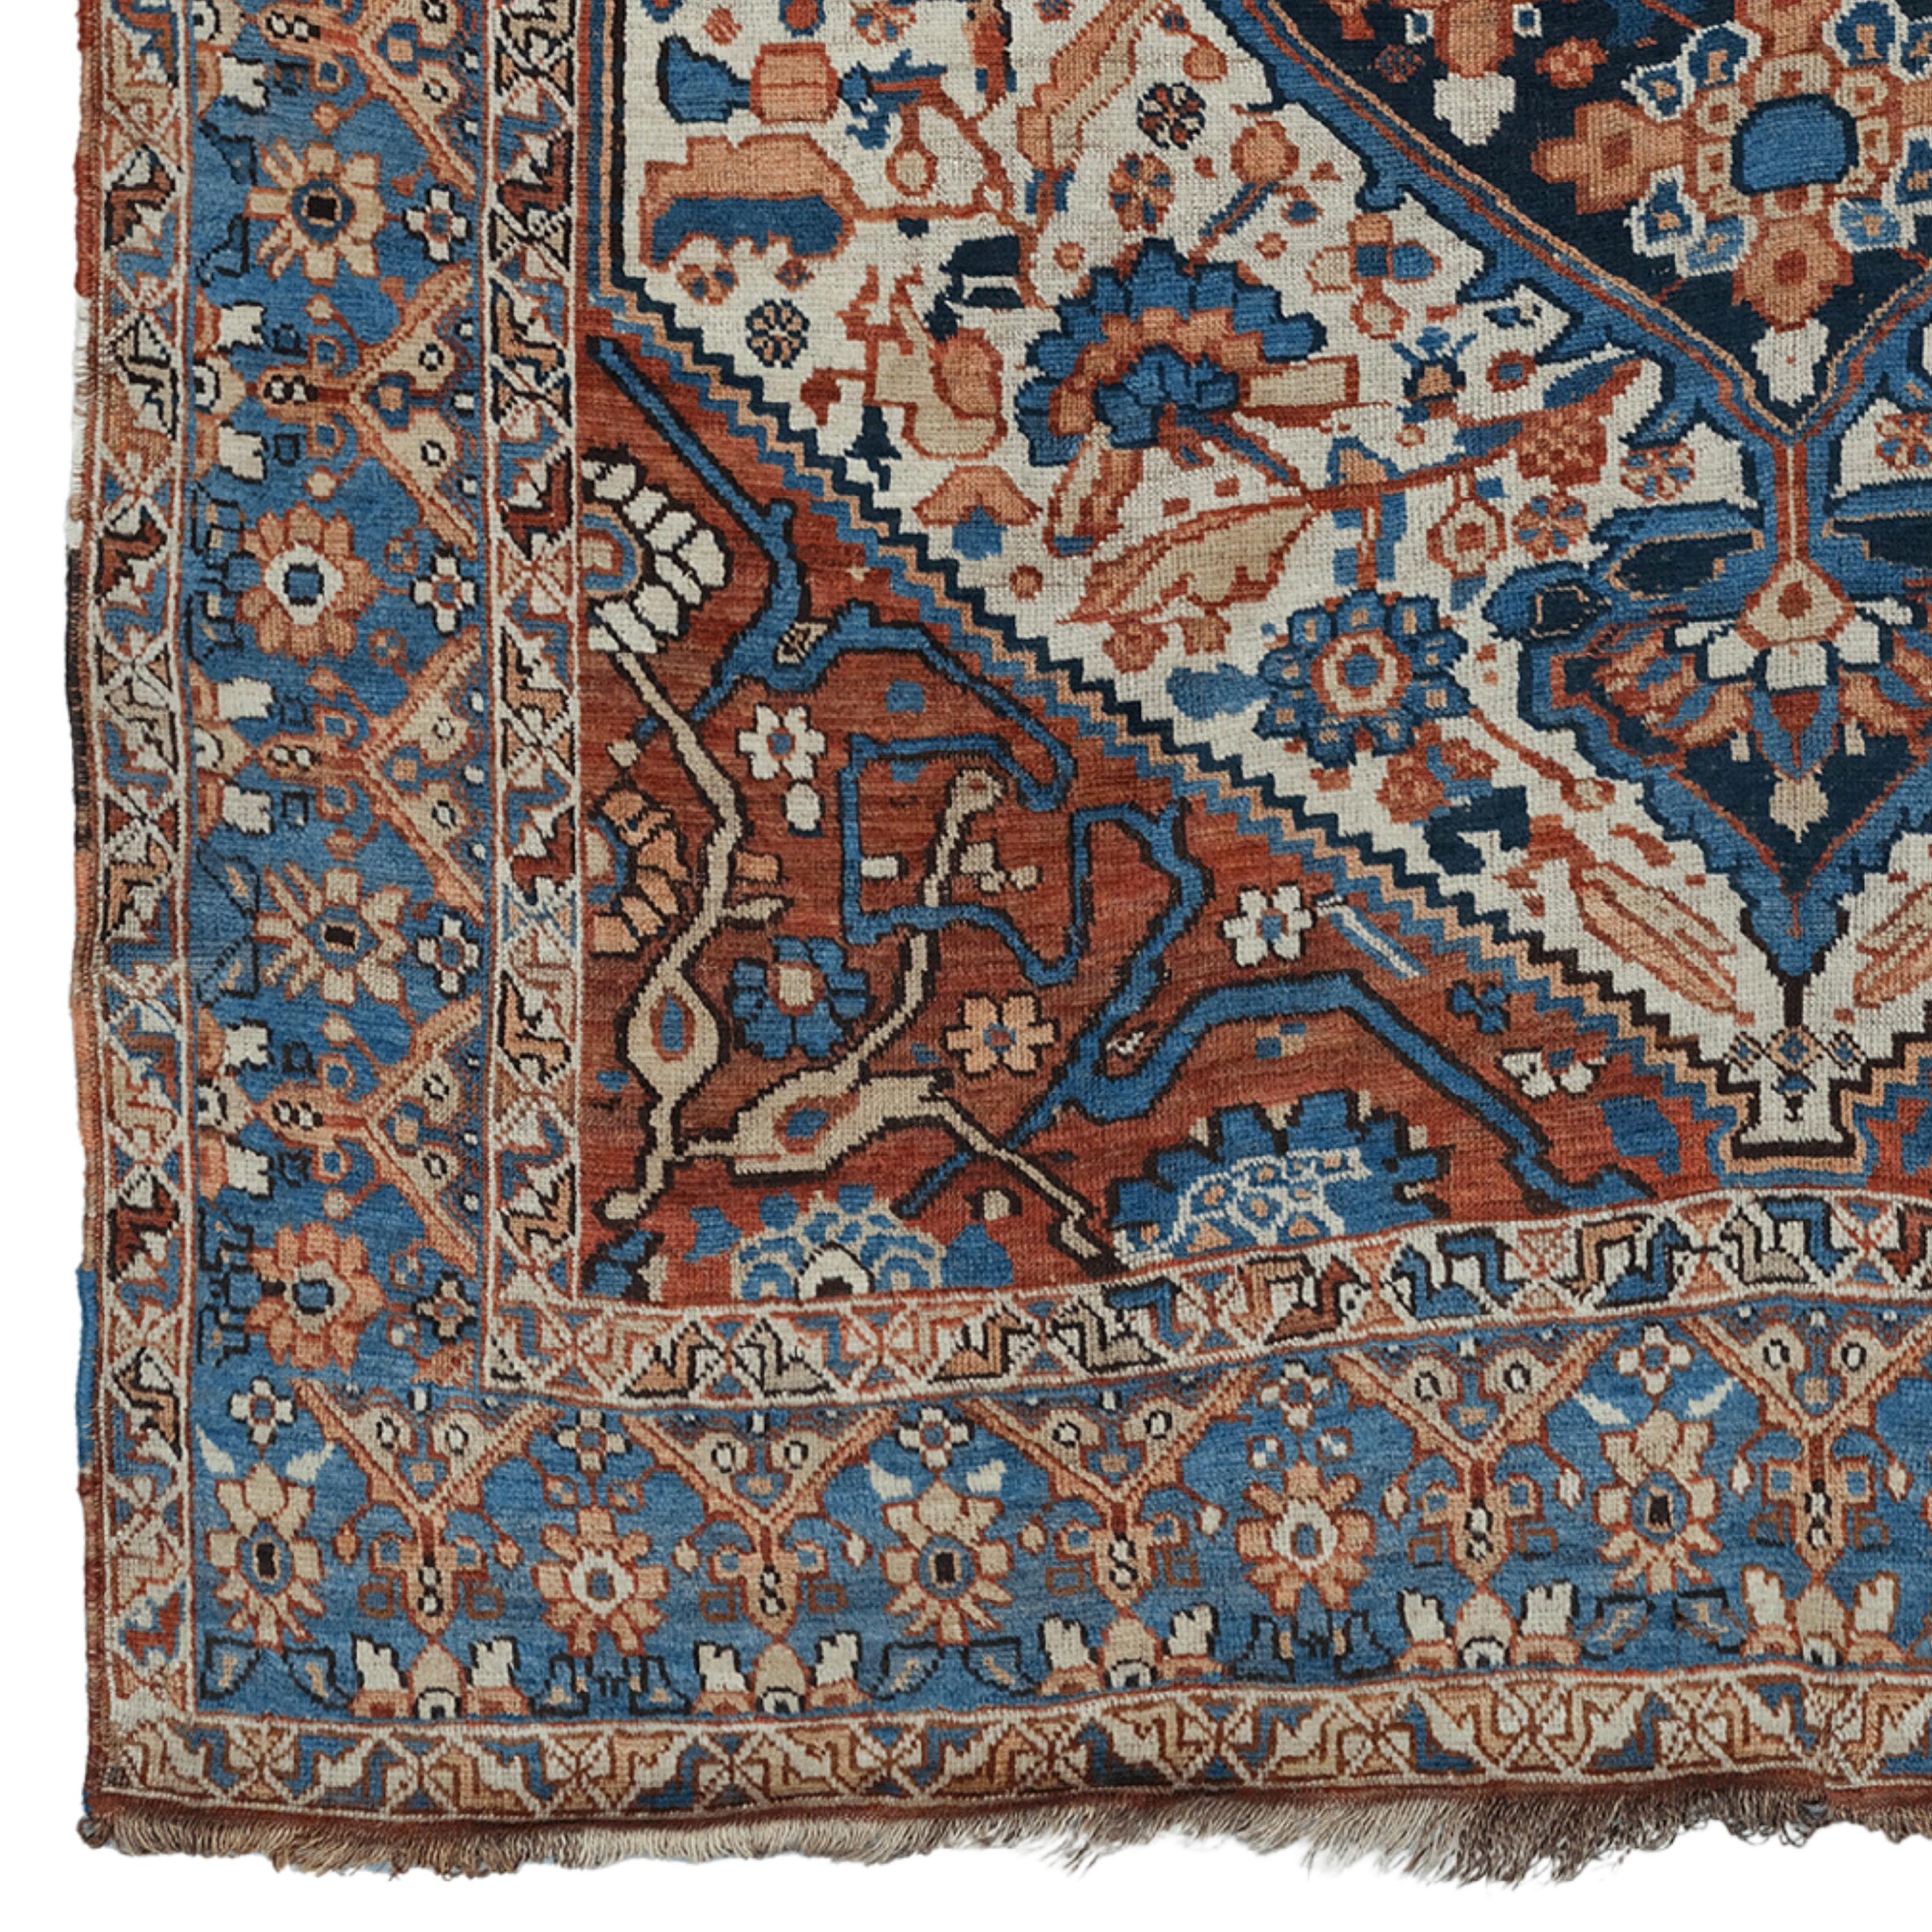 This exquisite antique Khamseh rug is a work of art from the late 19th century. This piece, which draws attention with its rich color palette and complex patterns, has a feature that will enrich the atmosphere of any space. Wool material is known